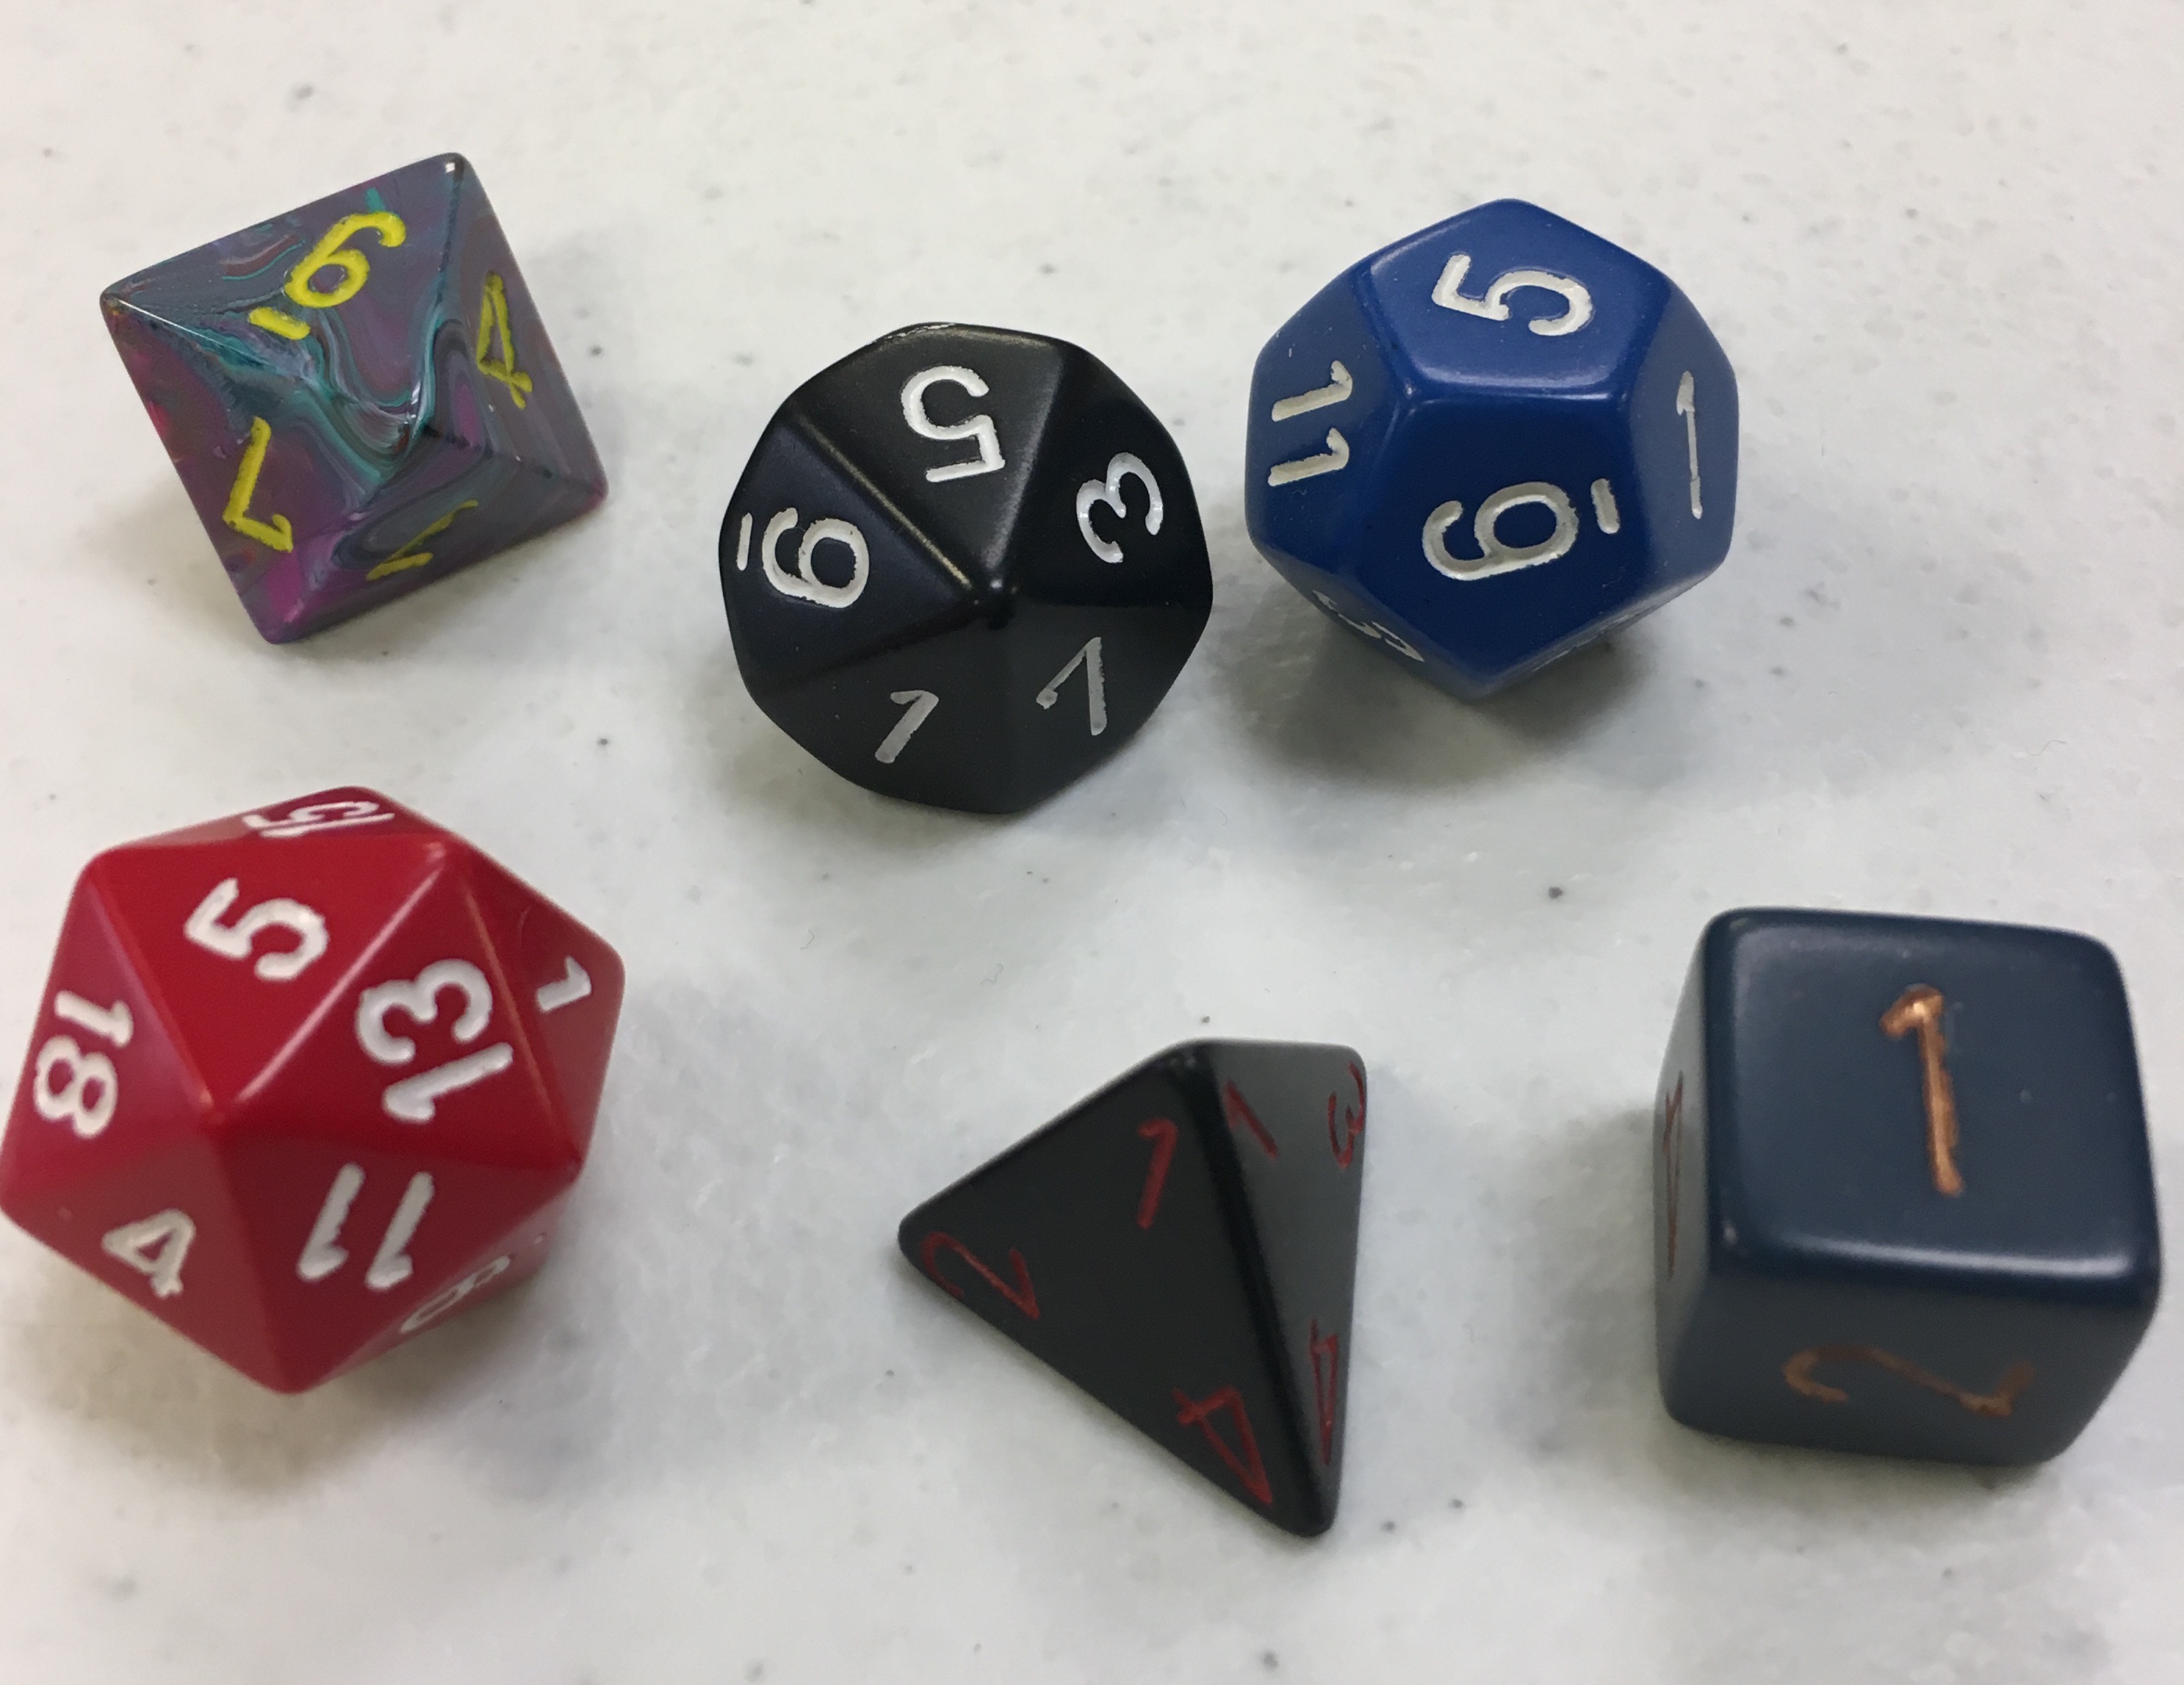 A color photograph showing six types of die in various colors